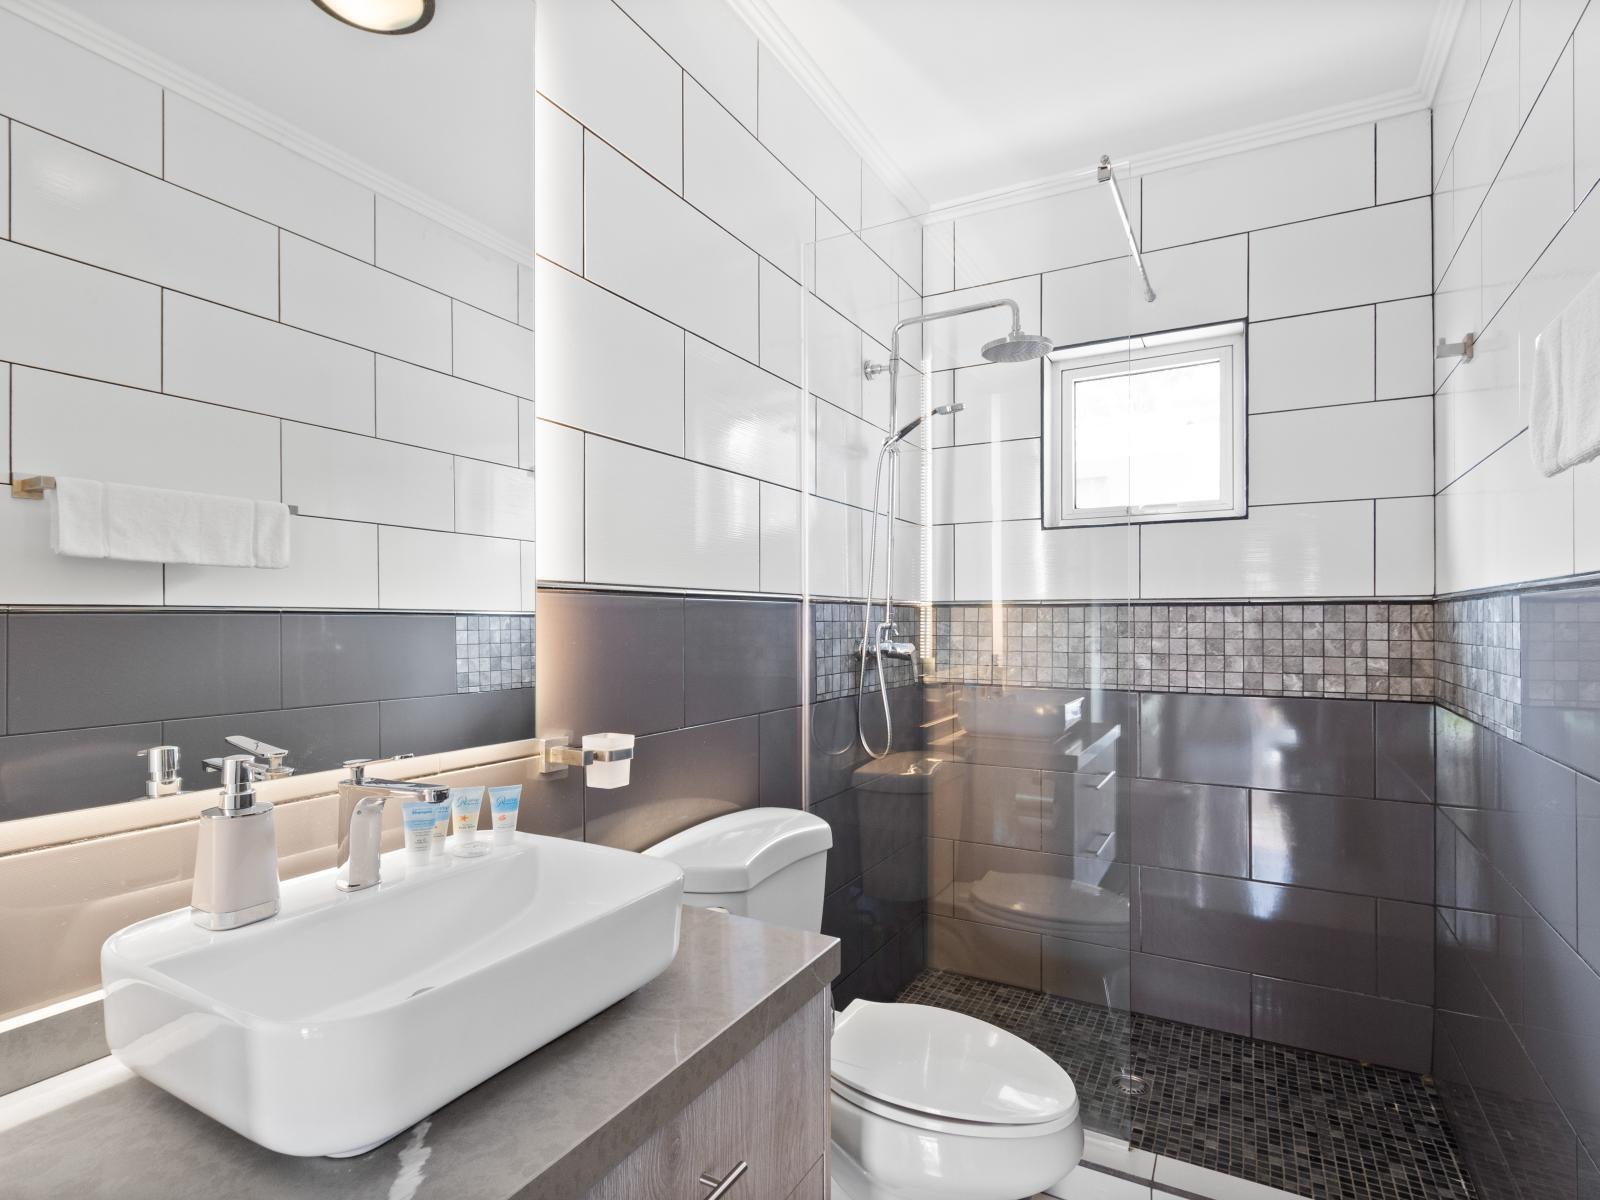 - Exclusive Bathroom of the apartment in Noord, Aruba - Beautiful Vanity with large size wall mirror - Sufficient storage space - Neat and clean toilet seat - Availability of all bathroom amenities - Stunning glass cabin shower area